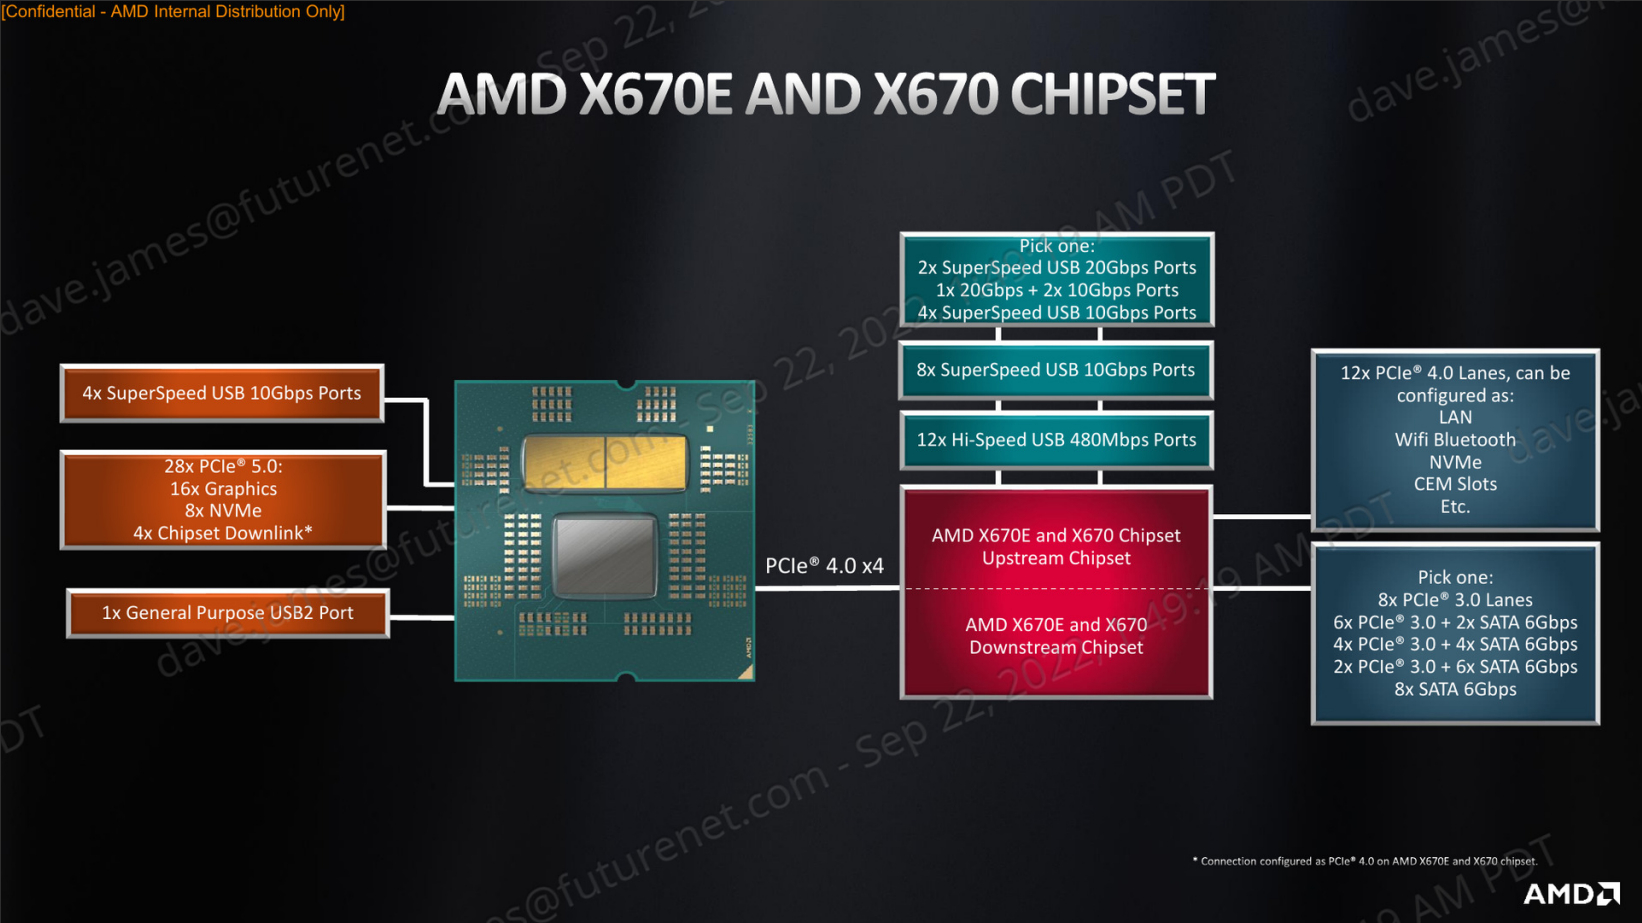 AMD layout of existing X670E and X670 chipset